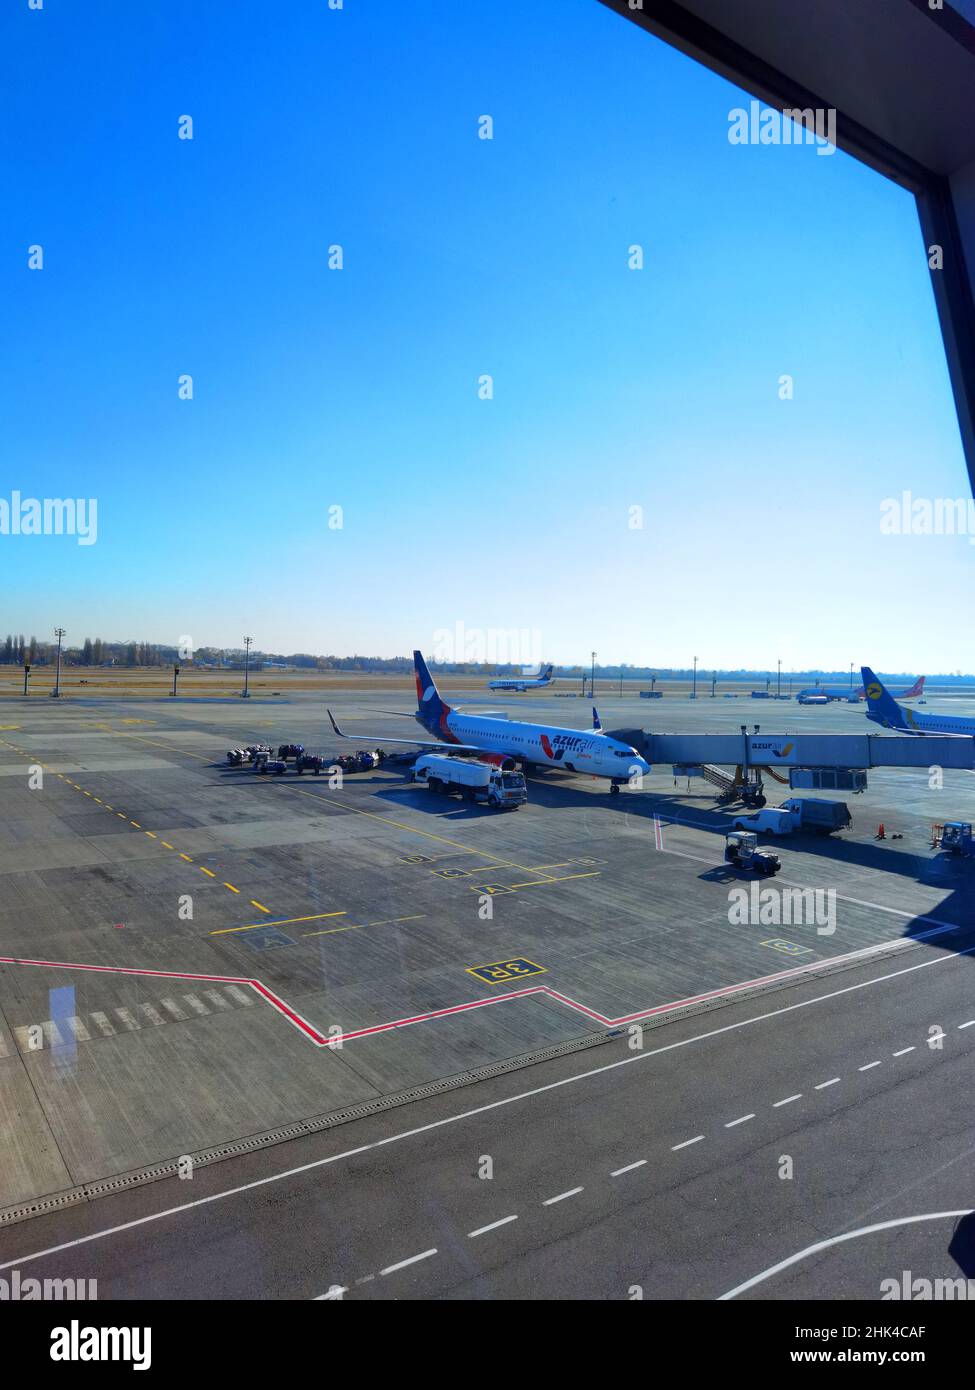 Boryspil, Ukraine - January 31, 2022: Airport panoramic view. Airport apron overview. Aircrafts at the airport gates. Kiev Boryspil International Stock Photo